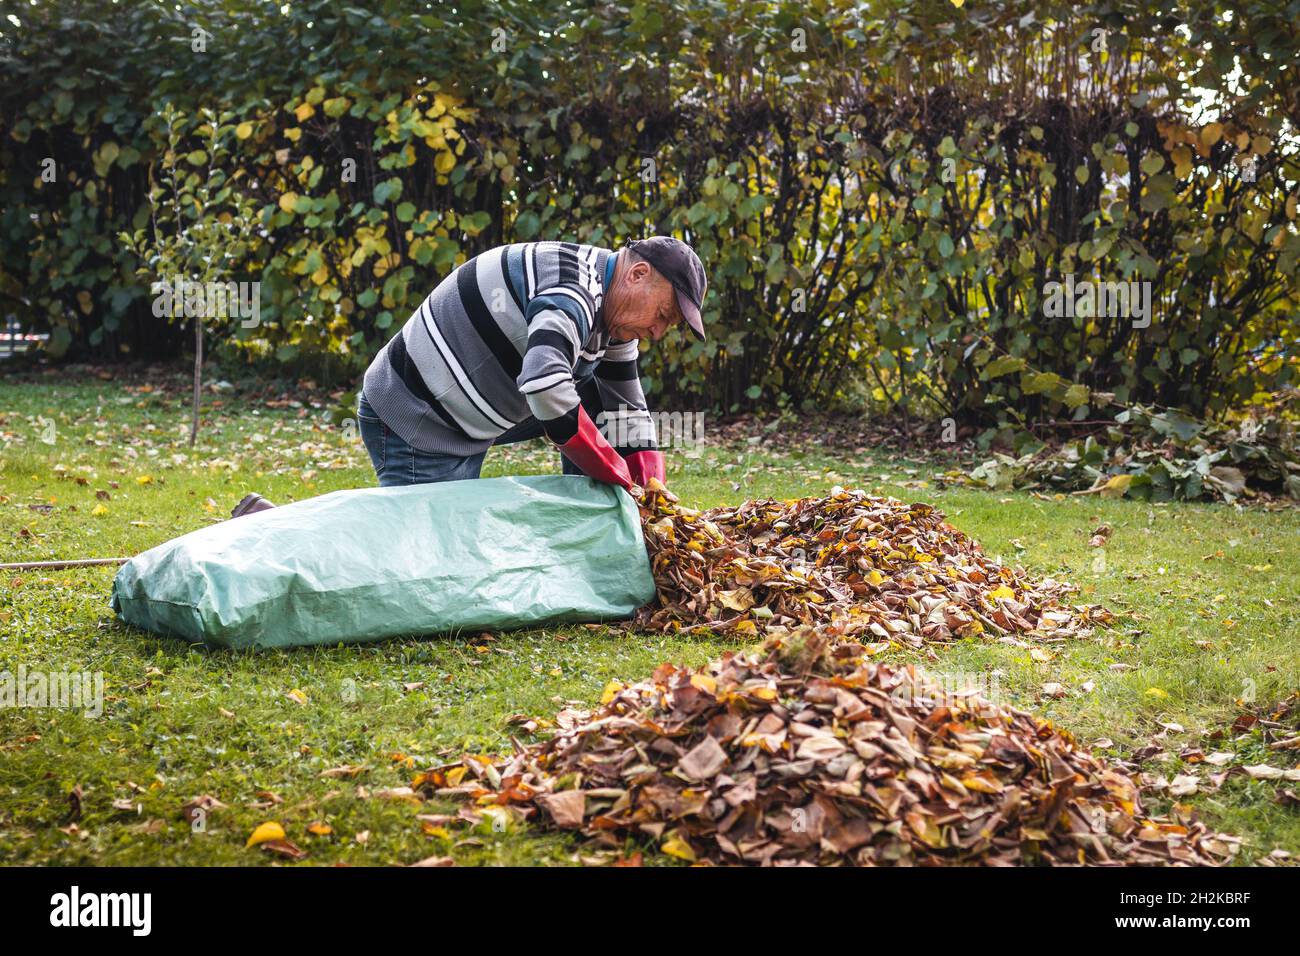 Senior man cleaning garden from fallen leaves. Raking and gardening in fall season. Putting autumn leaf into plastic bag for composting Stock Photo